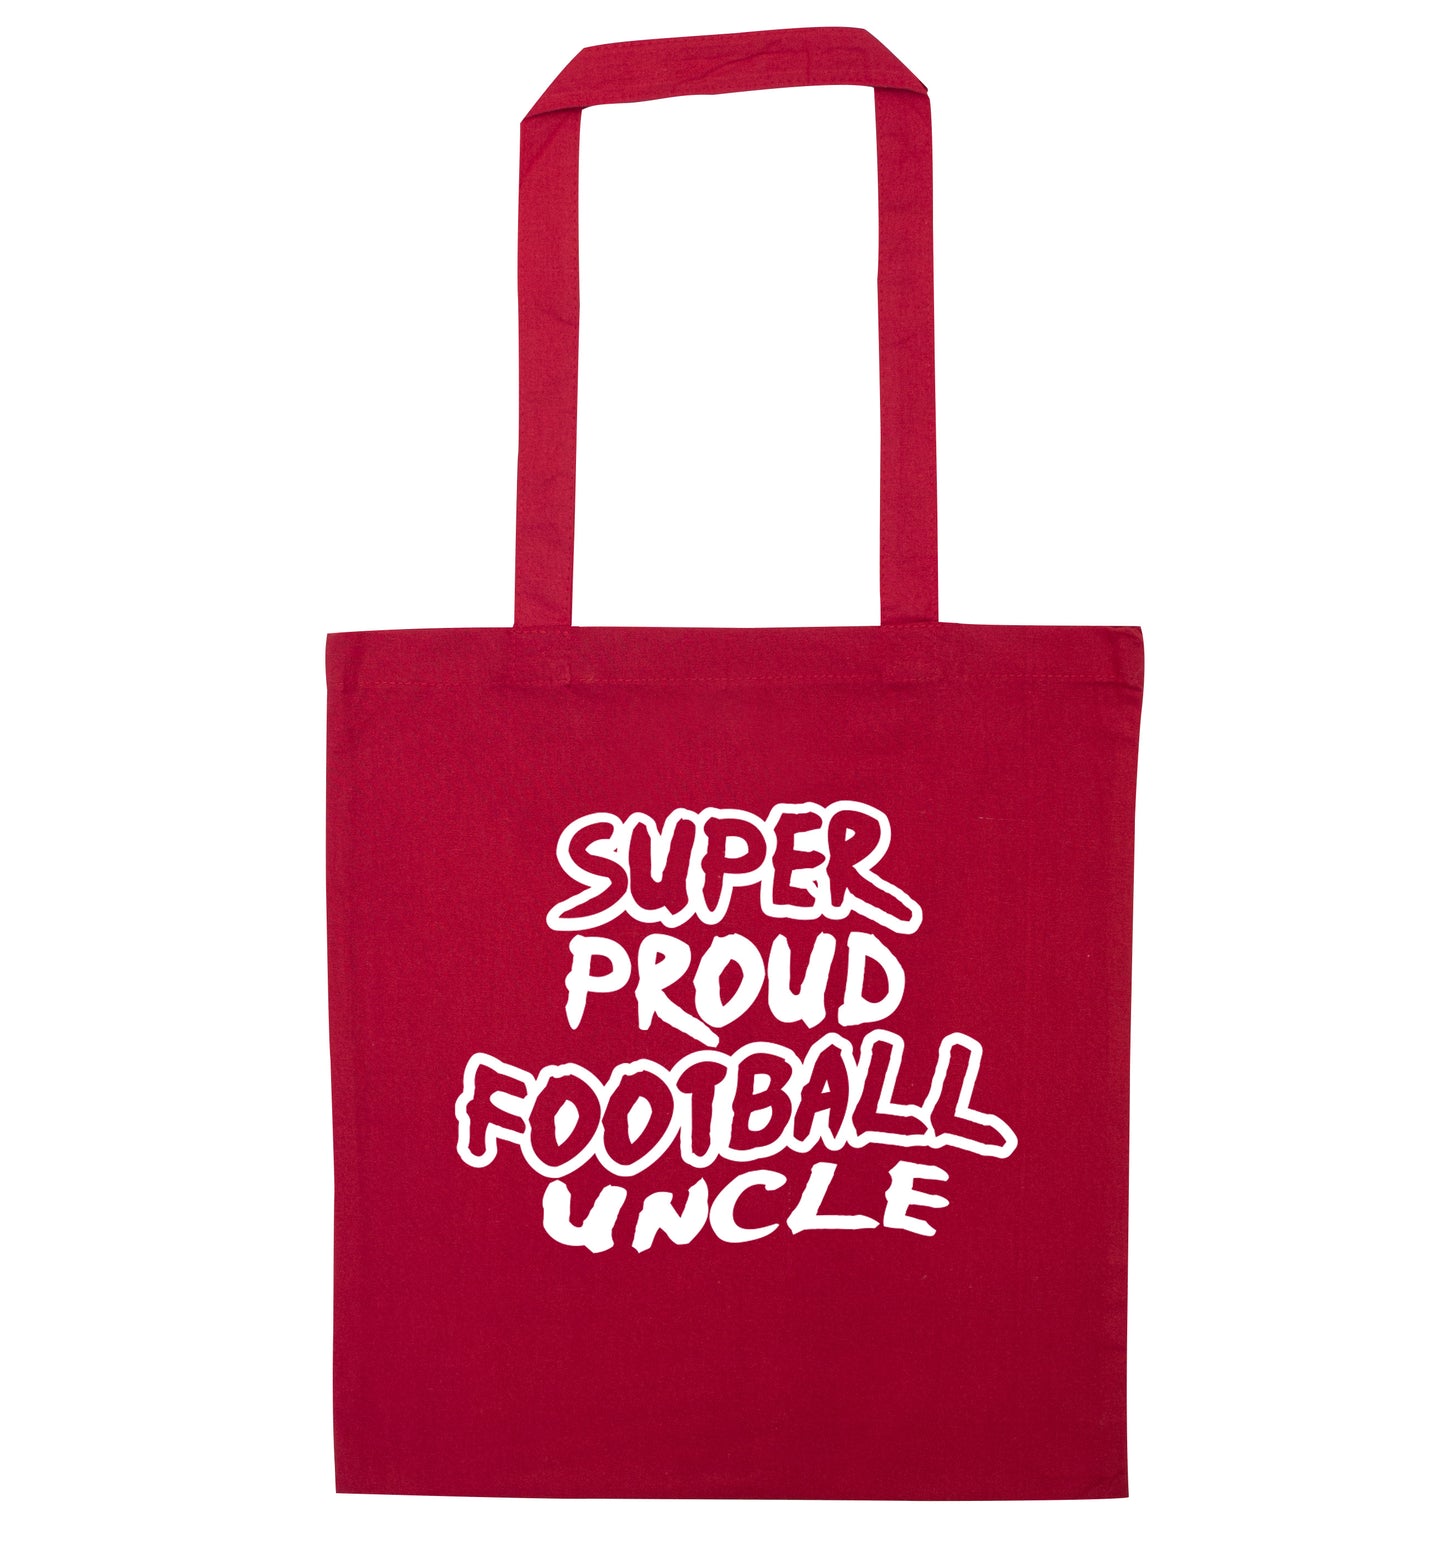 Super proud football uncle red tote bag